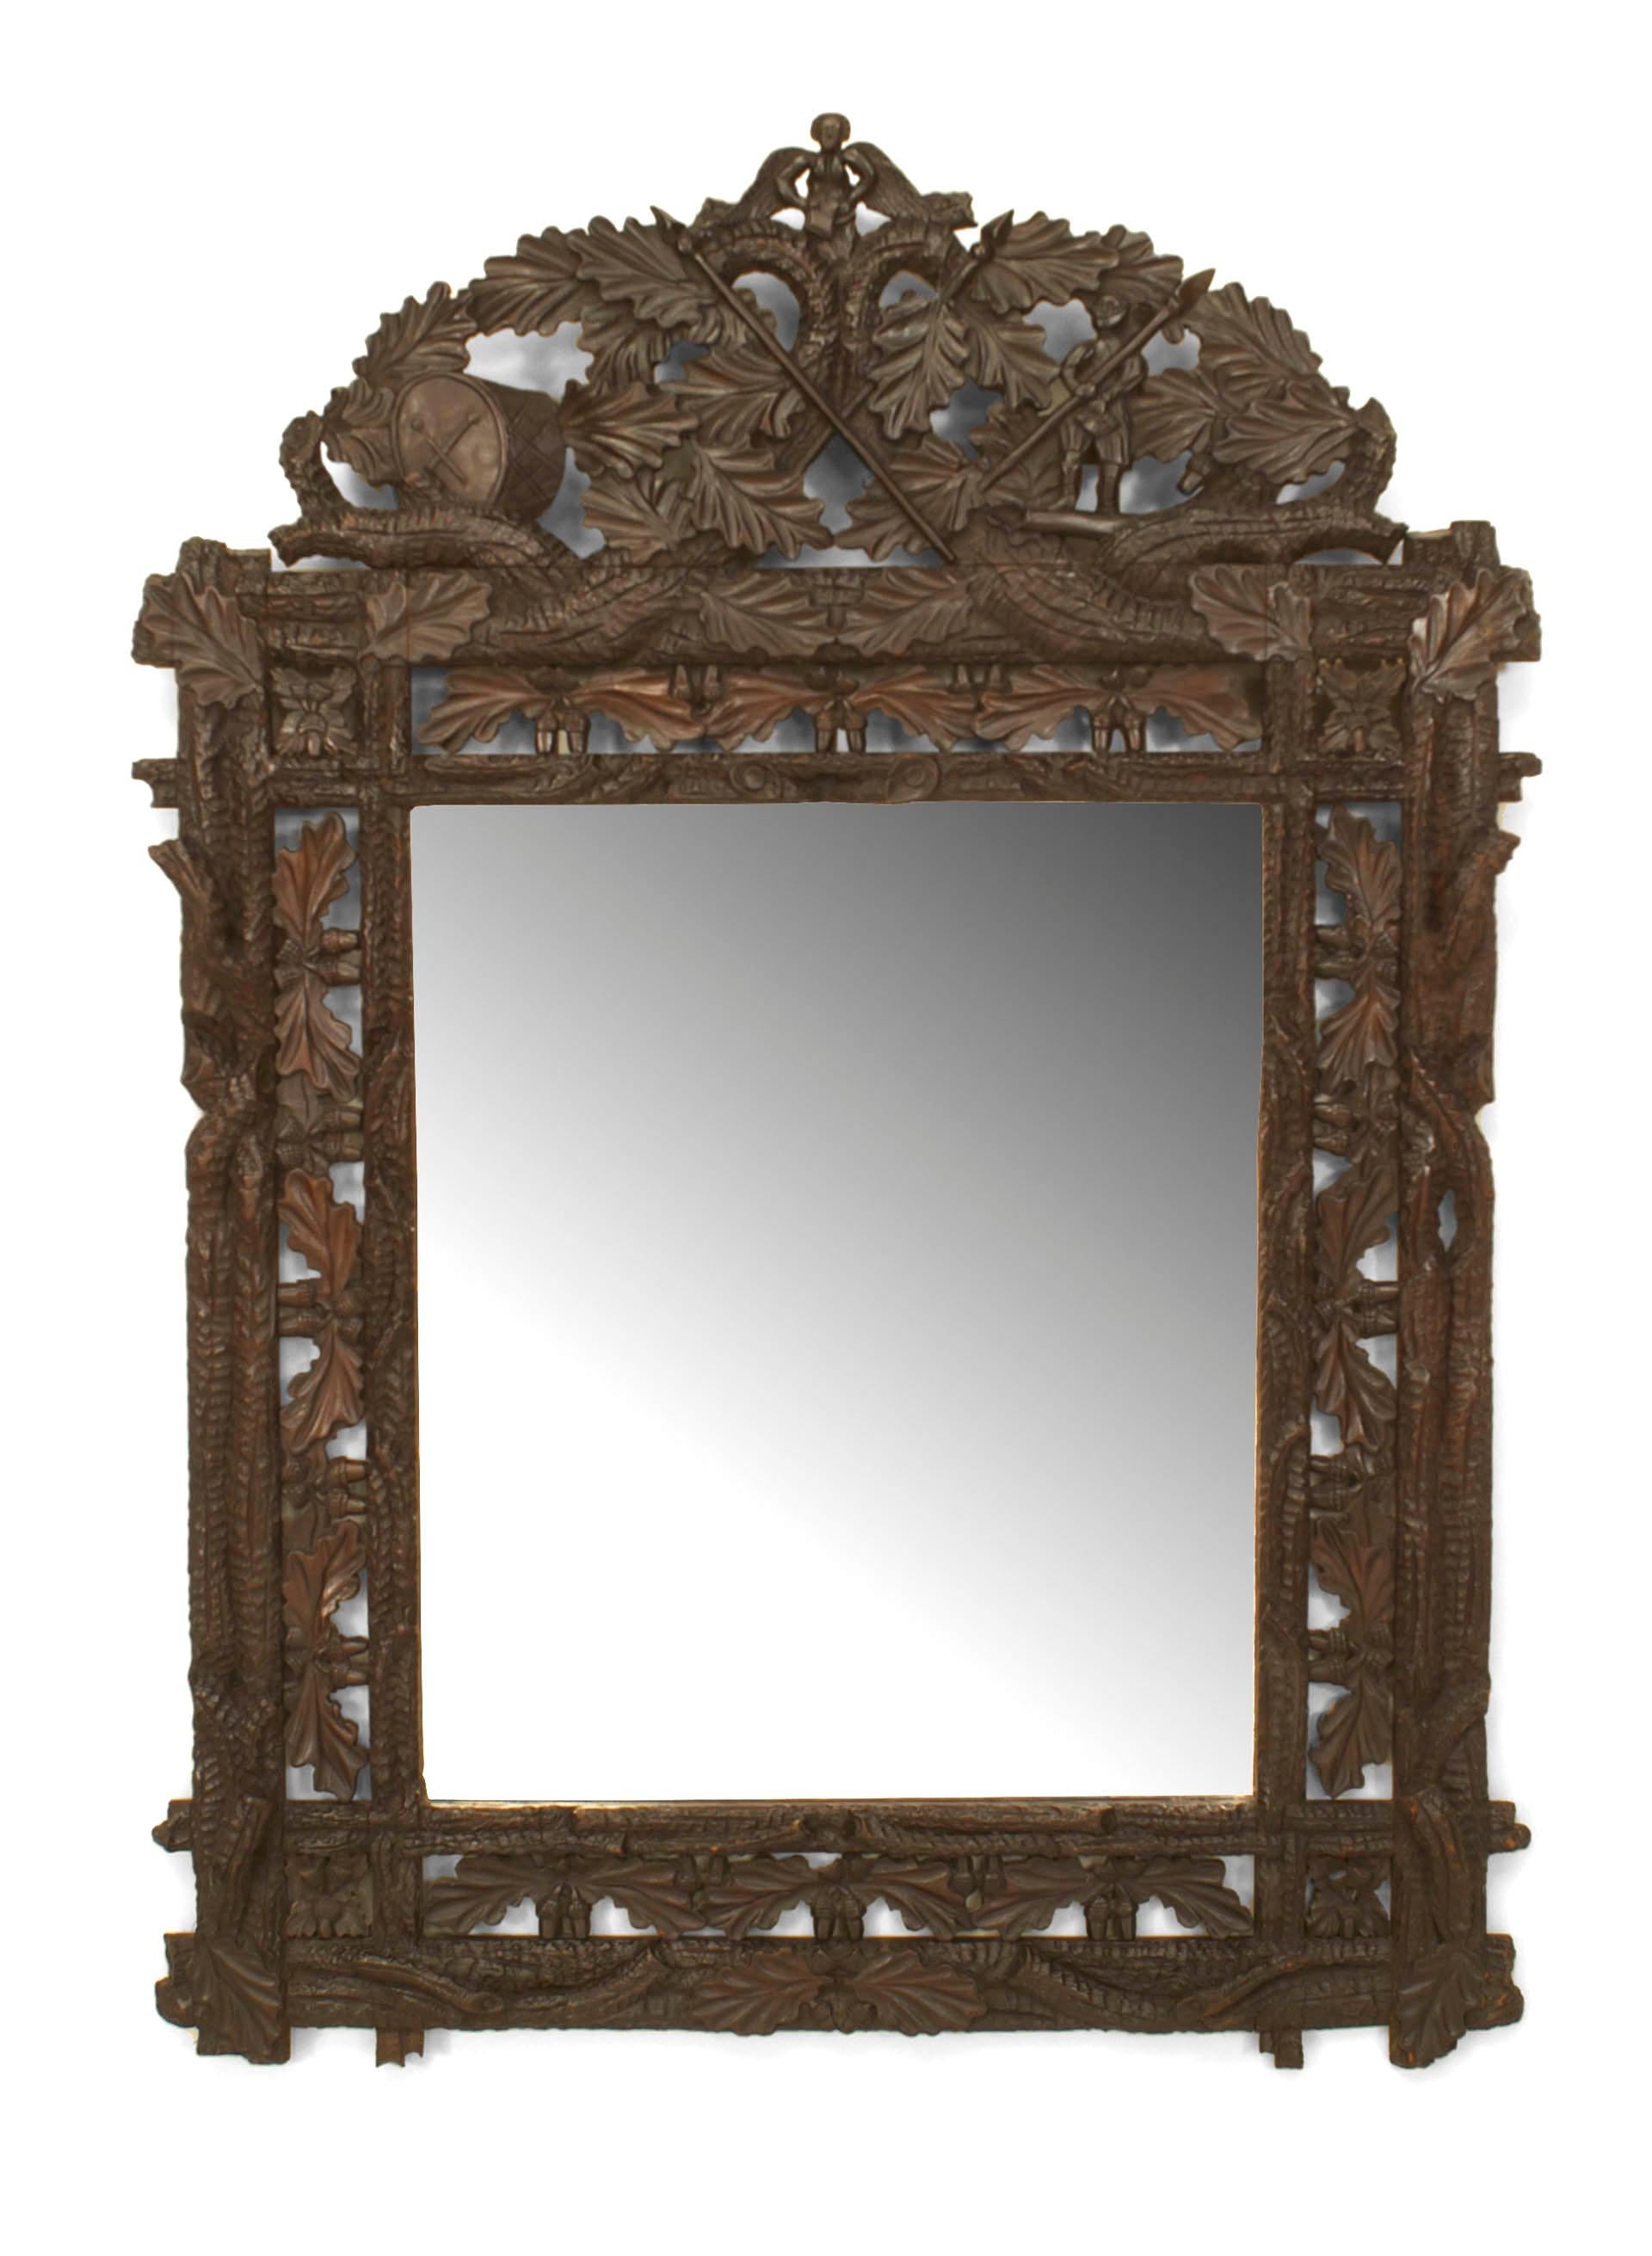 Rustic black forest carved wall mirror positioned within a filigreed faux twig and oak leaf design frame beneath a dramatic foliate pediment.